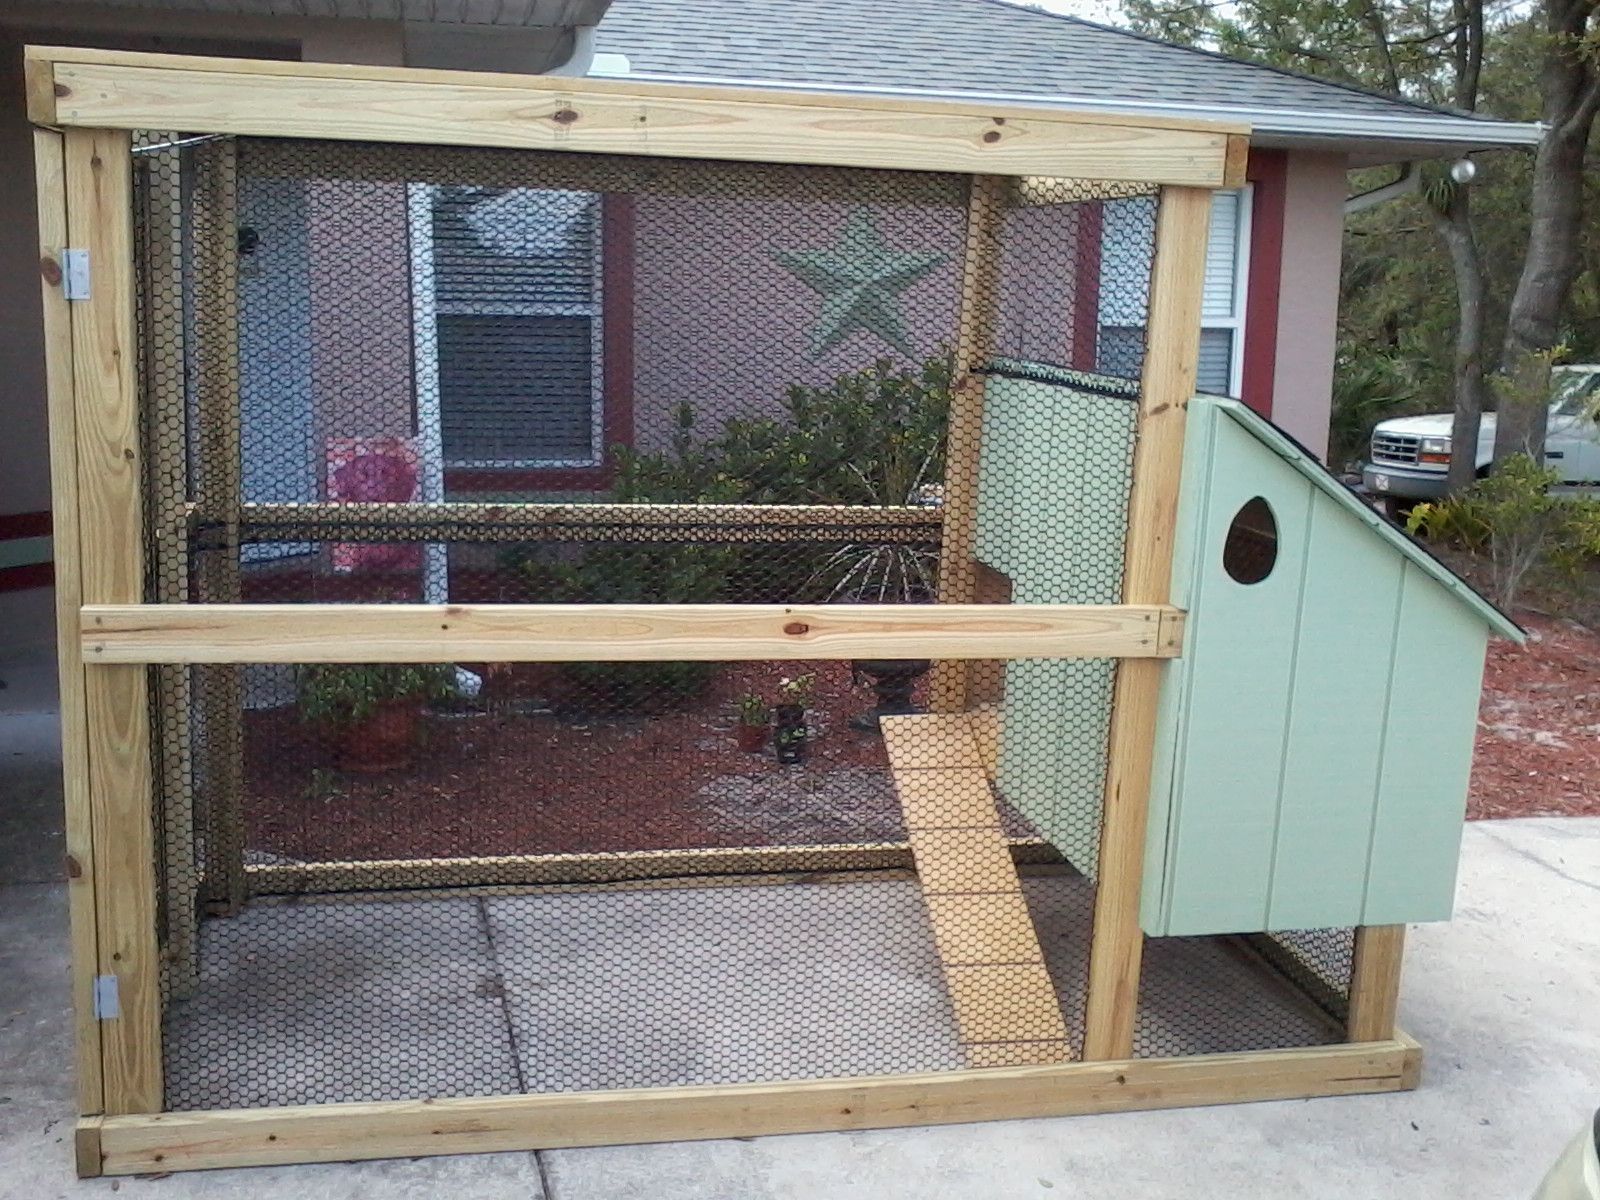 DIY chicken coop, we’re calling it the “Coop deVille”.  Hubby and I finished thi